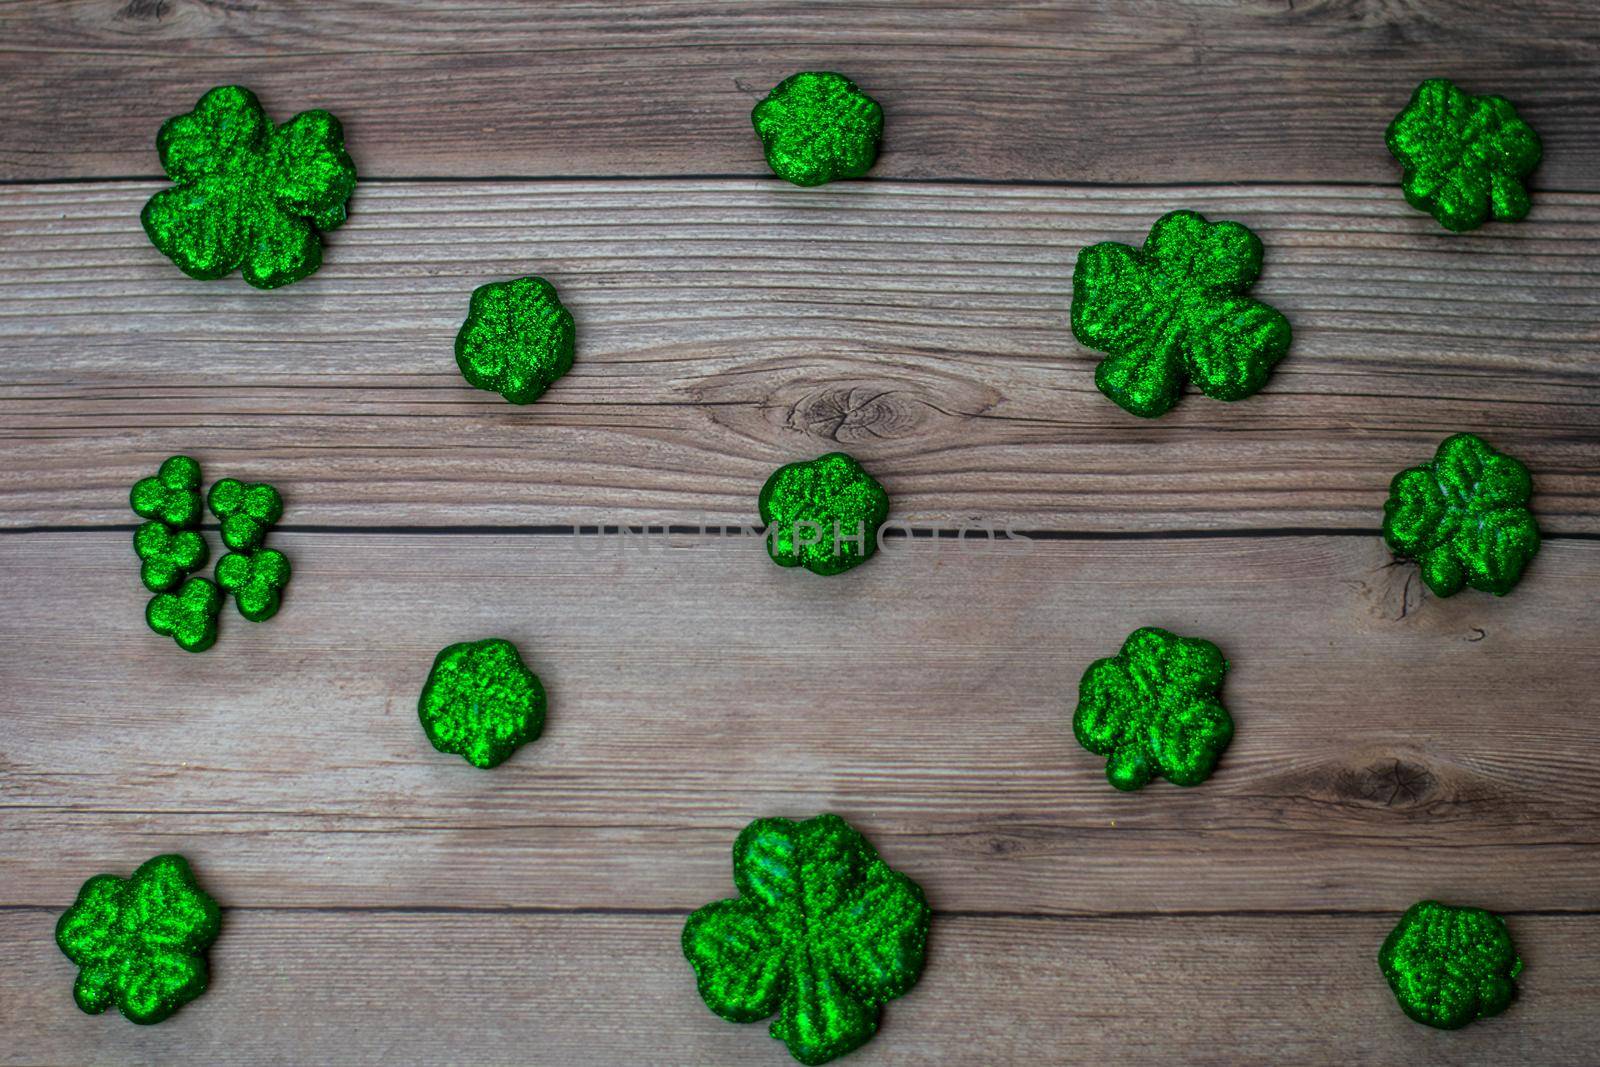 Glitter Covered Four Leaf Clovers in a Pattern on a Wood Background by bju12290